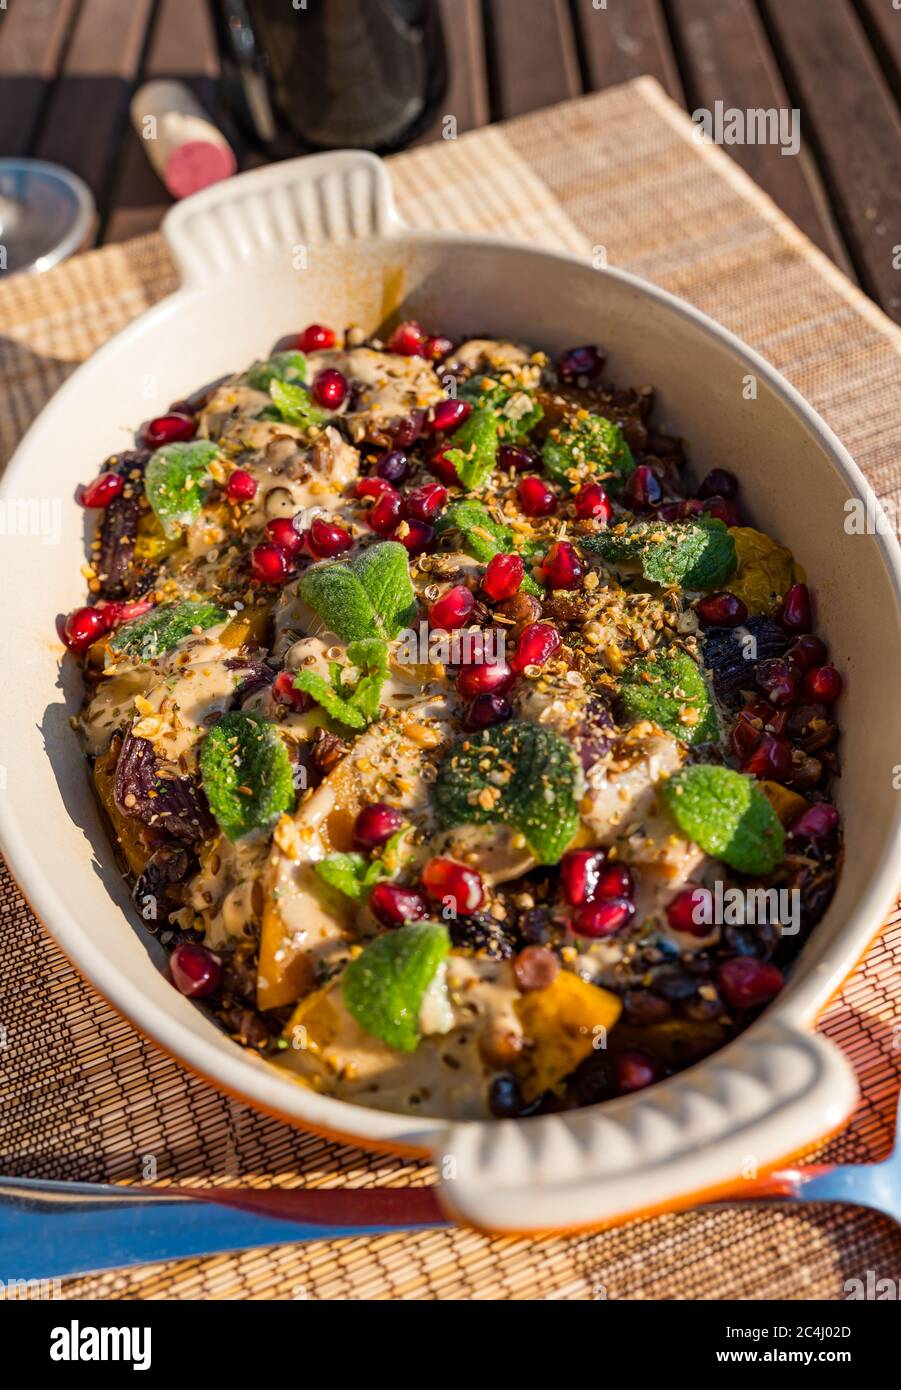 Middle Eastern roasted vegetable dish with lentils, butternut squash and pomegranate seeds, Summer meal outdoors, UK Stock Photo